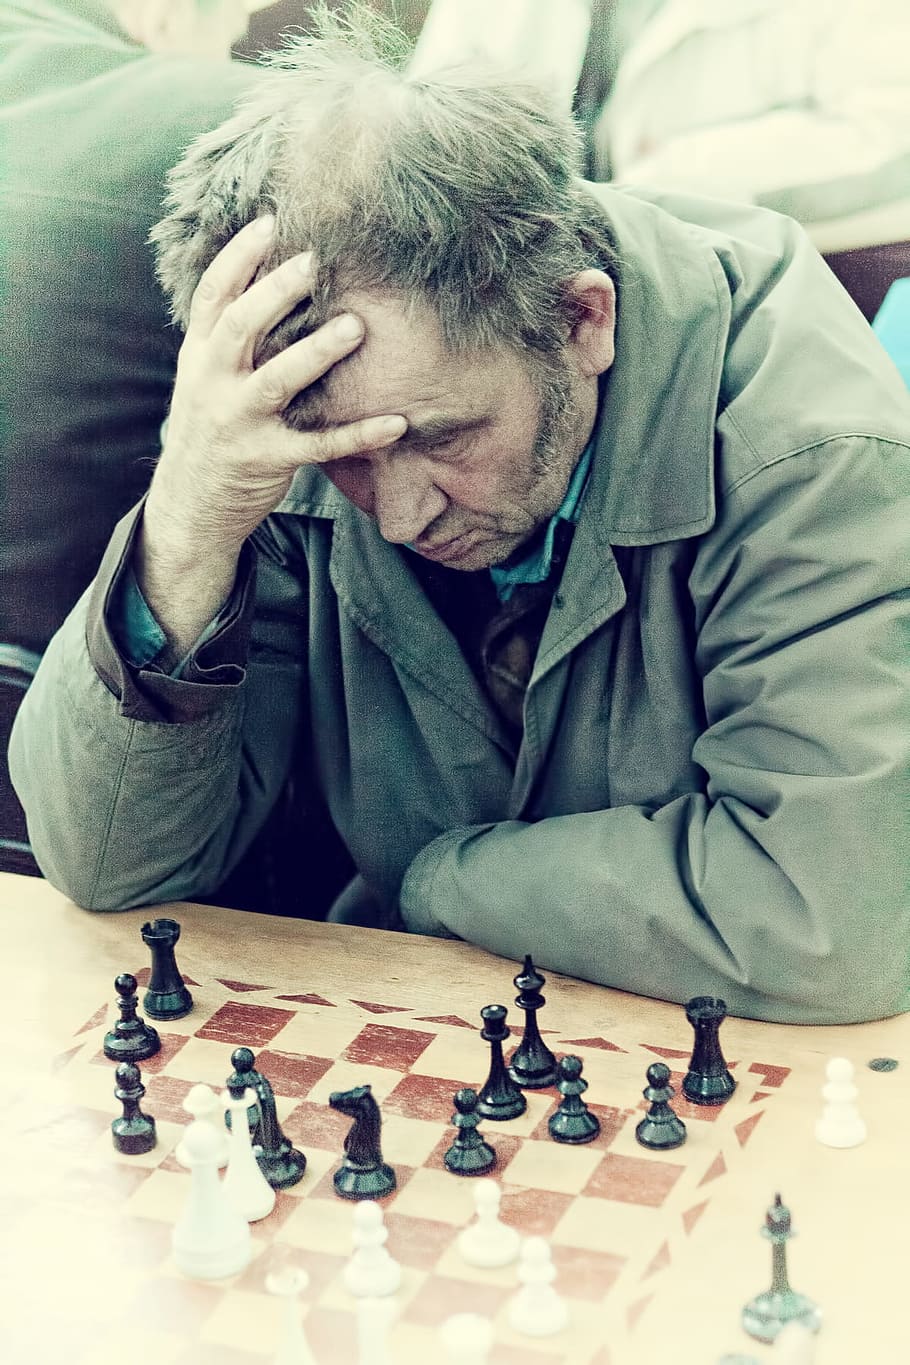 battle, board, challenge, champion, chess, chessboard, competition, game, hand, play